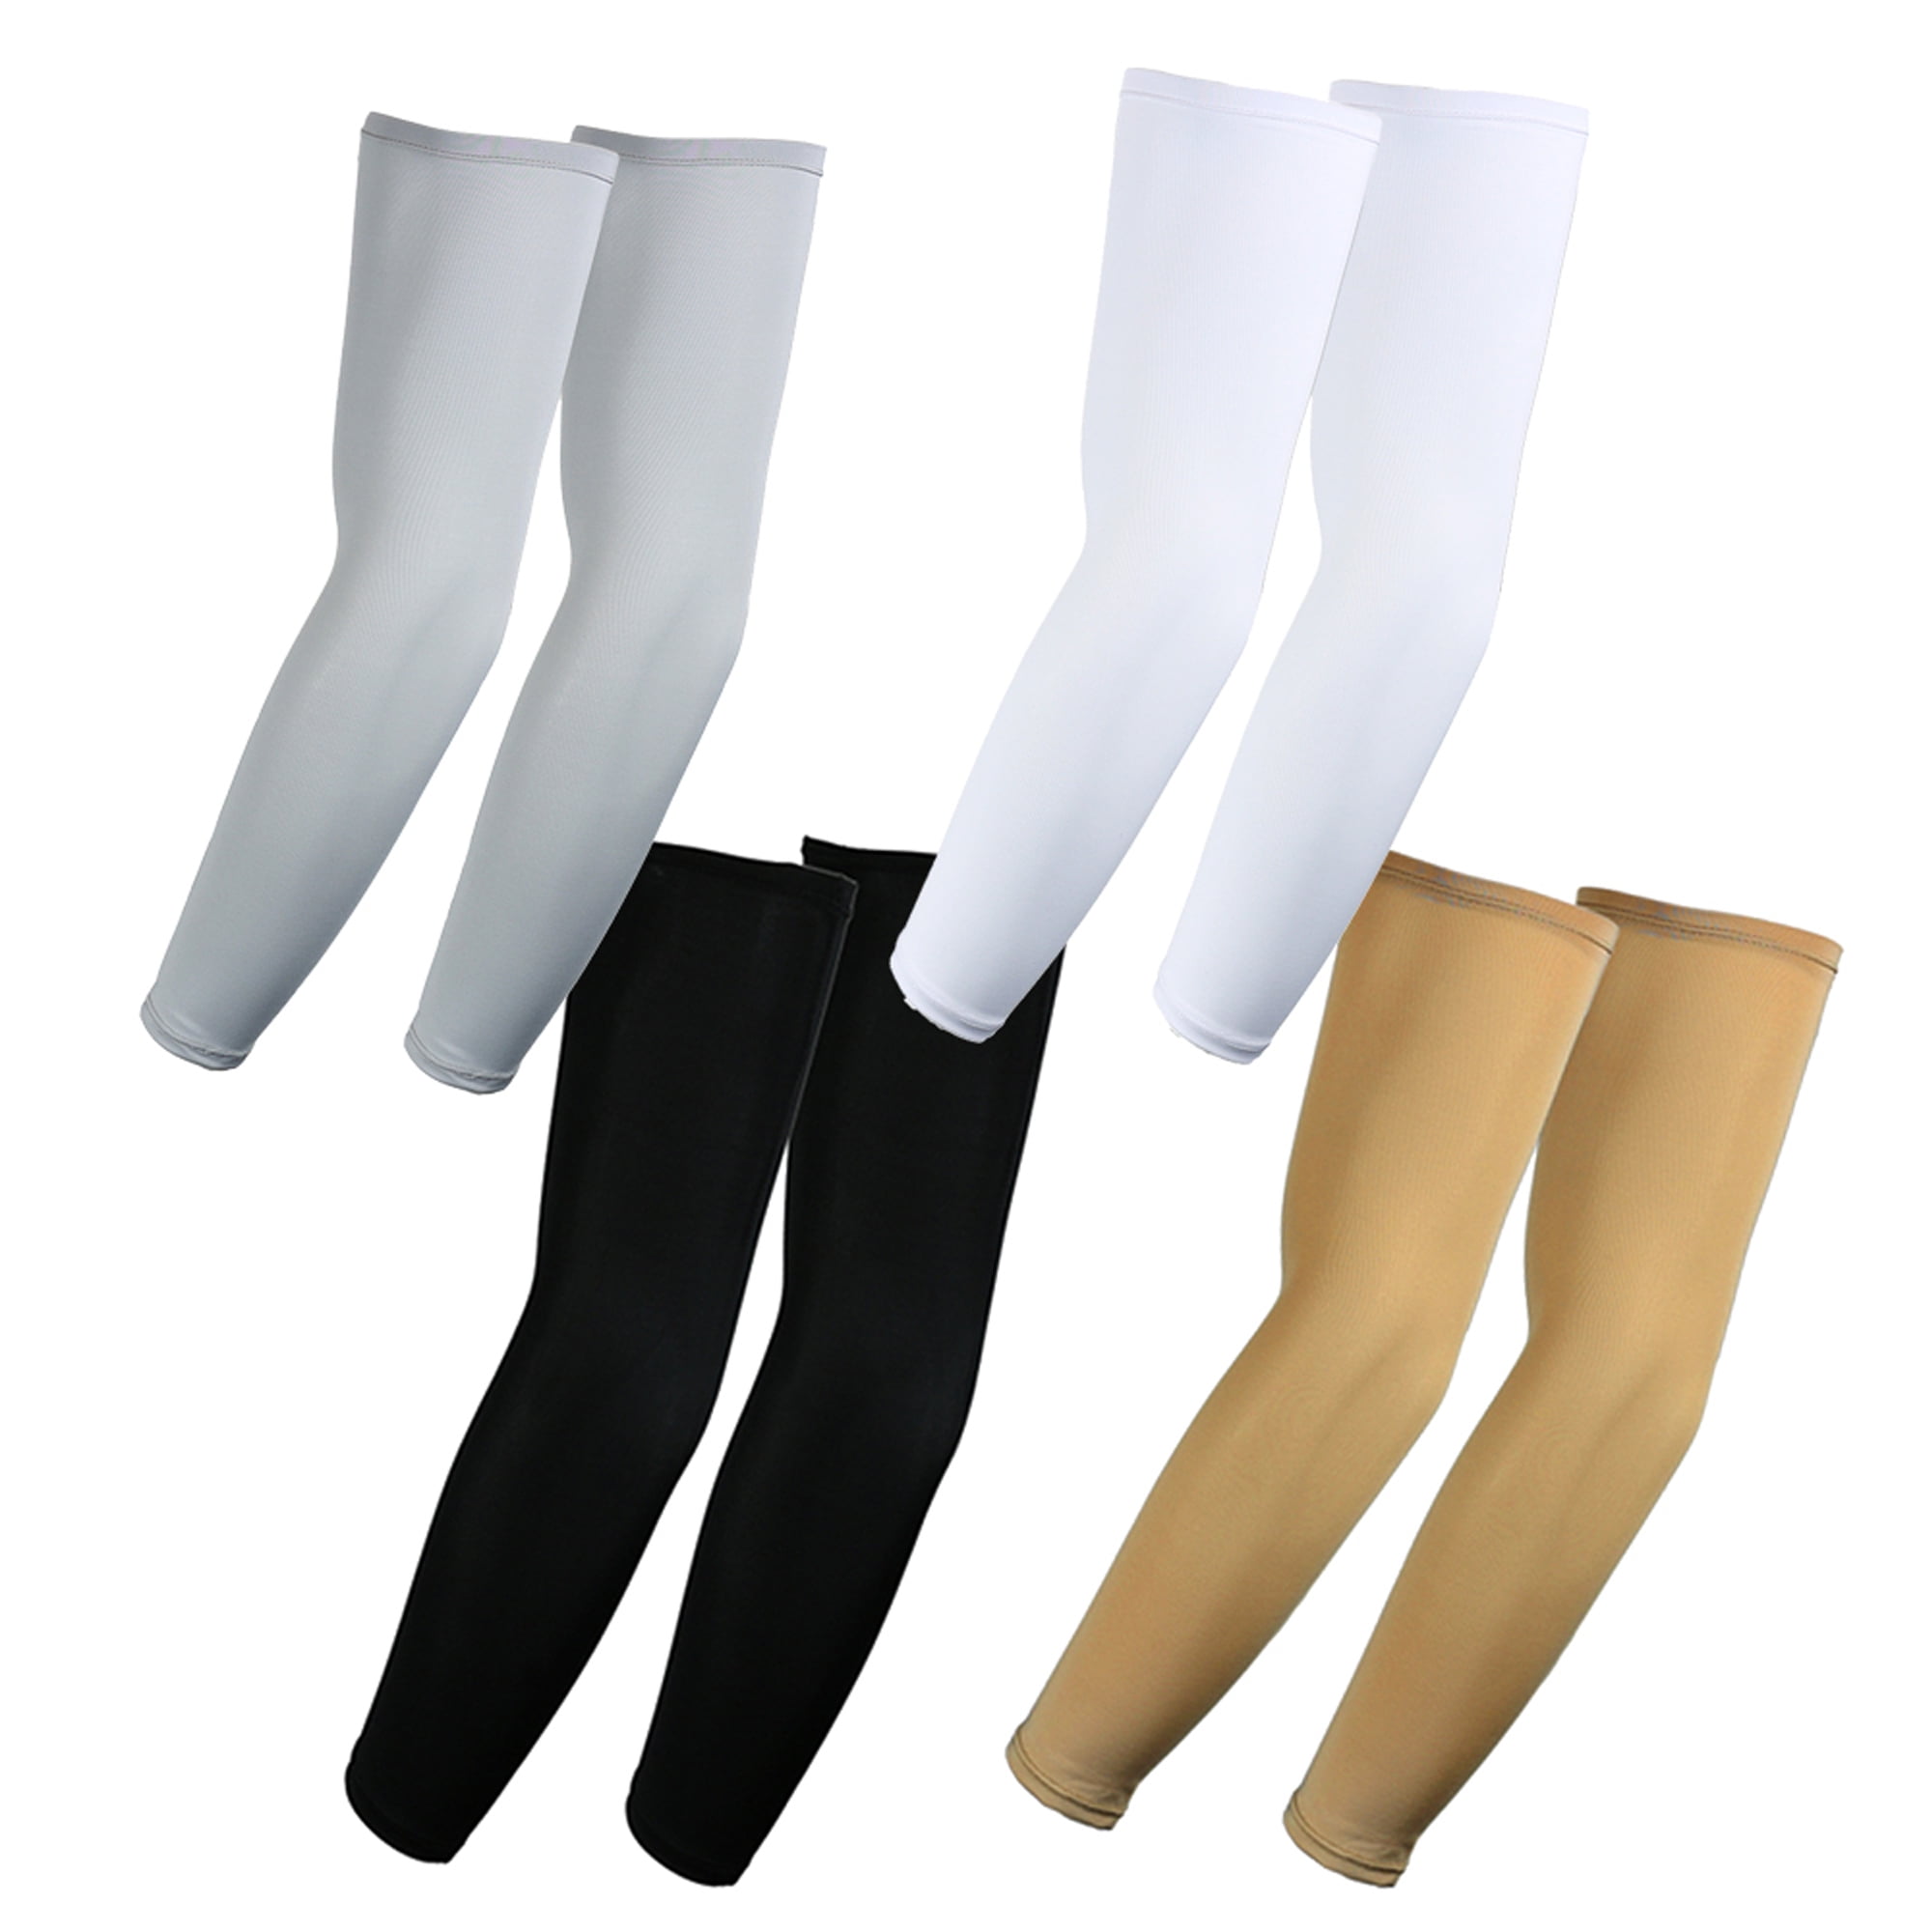 5 Pairs 10 pieces White Arm Sleeve Cover Skin Protection Outdoor Gardening 